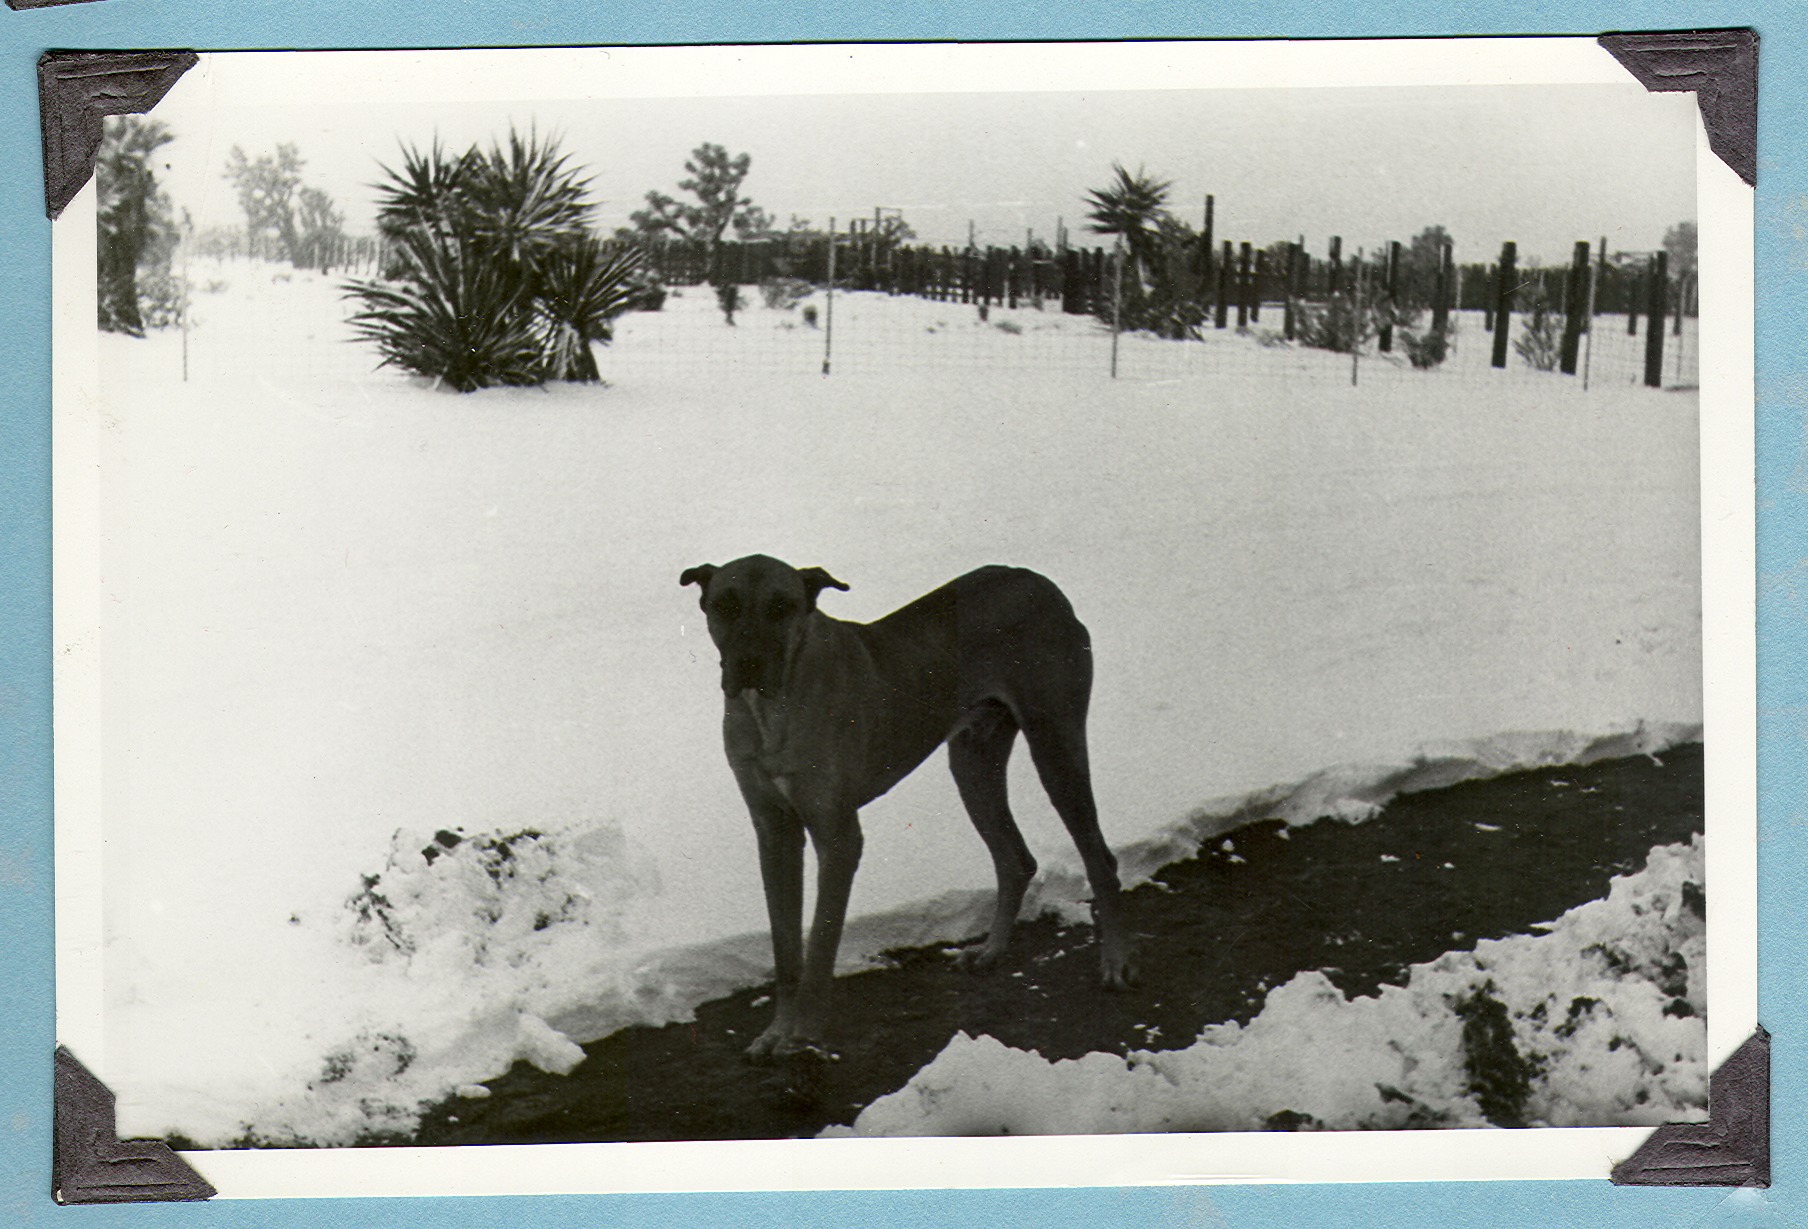 Dog (Sheik) in the snow: photographic print